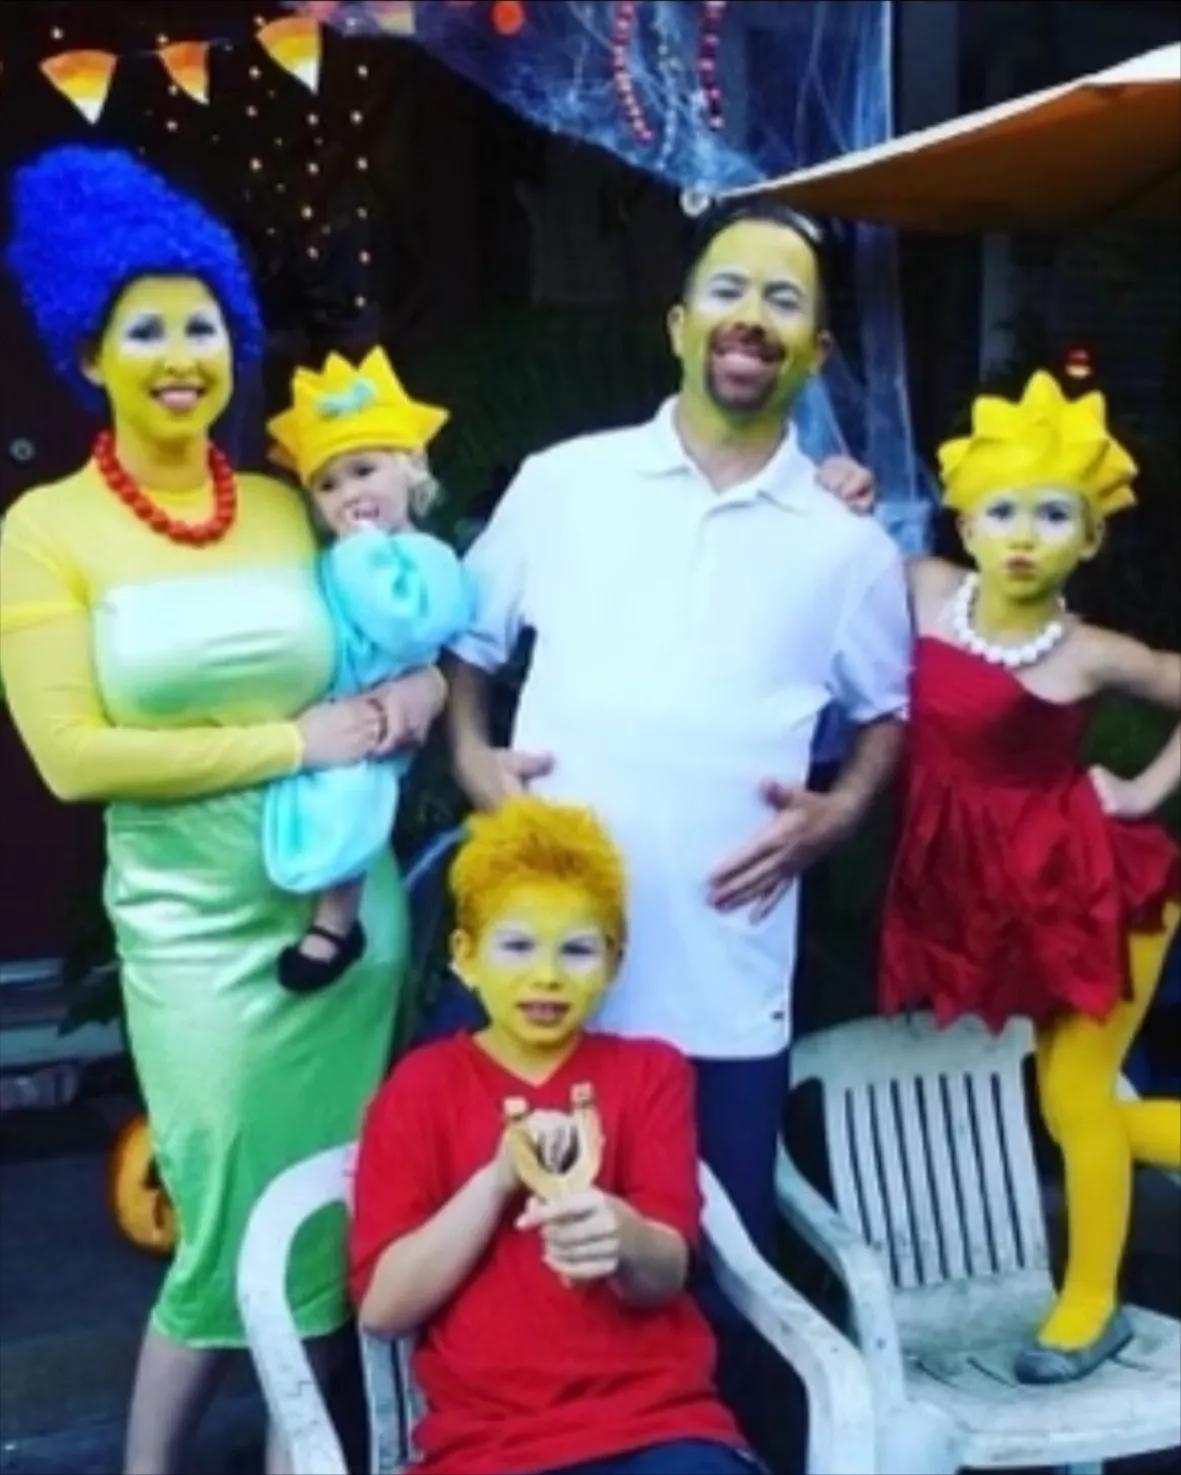 The Simpsons Kids Costumes